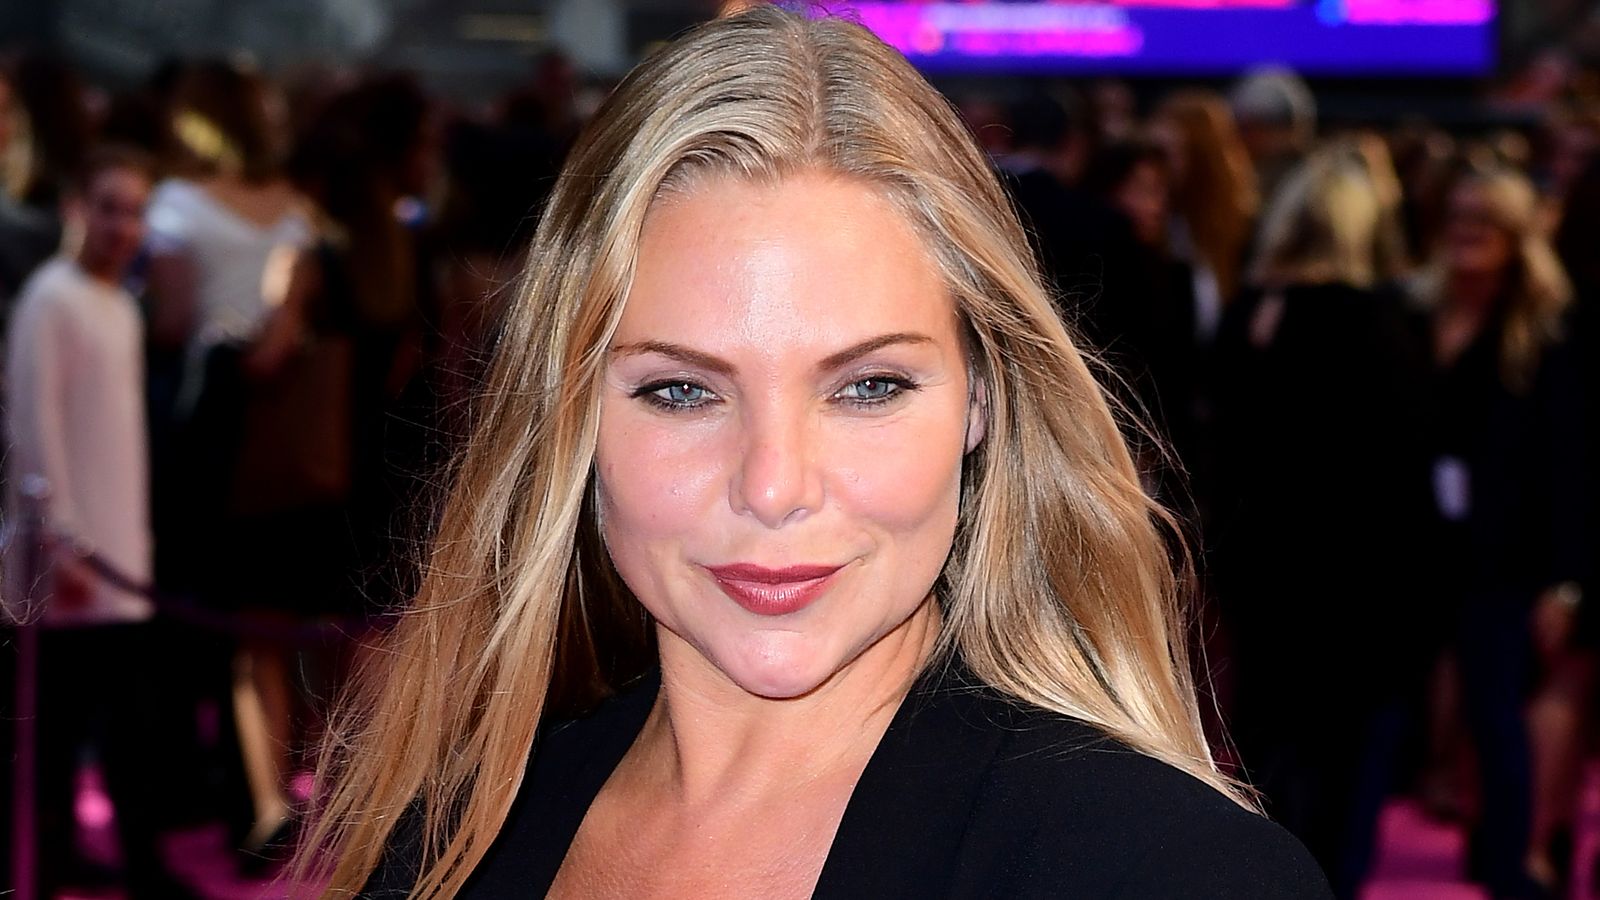 EastEnders star Samantha Womack reveals she has breast cancer in Olivia Newton-John tribute | Ents & Arts News